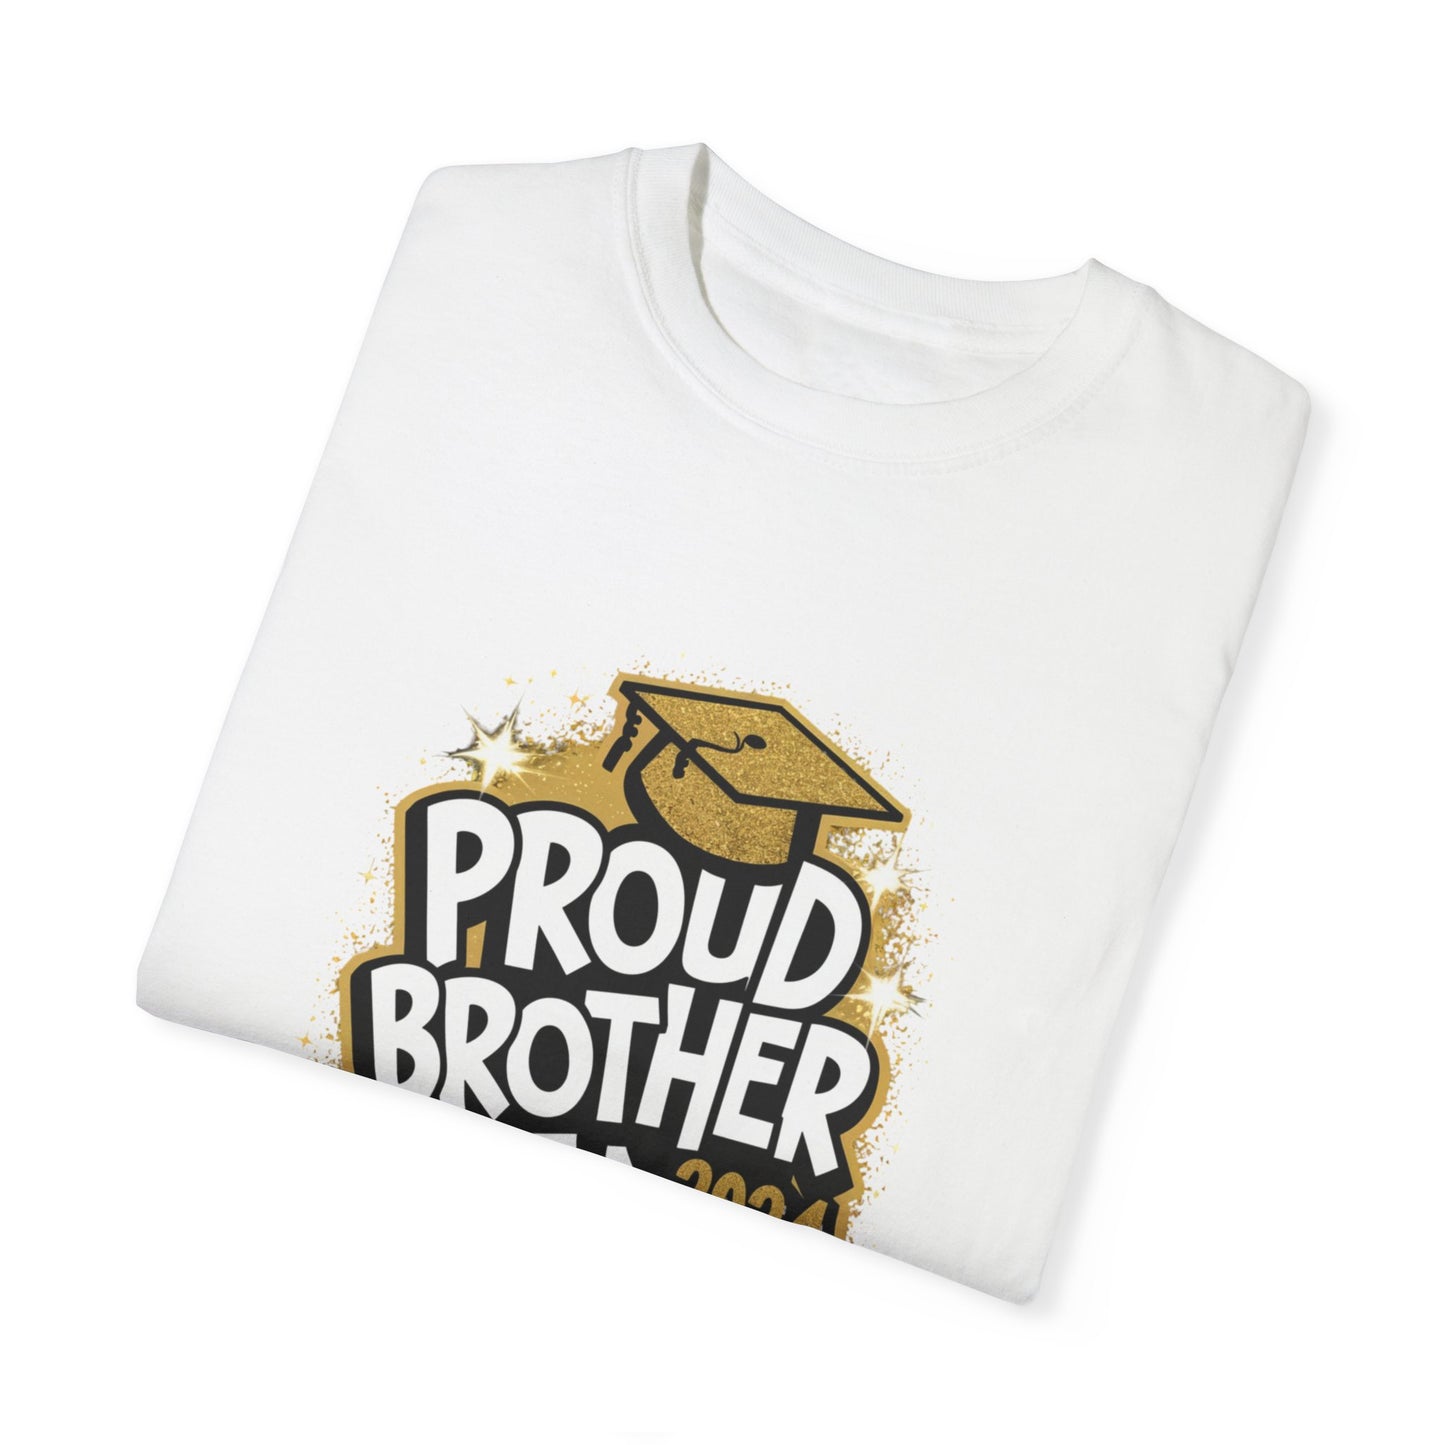 Proud Brother of a 2024 Graduate Unisex Garment-dyed T-shirt Cotton Funny Humorous Graphic Soft Premium Unisex Men Women White T-shirt Birthday Gift-23